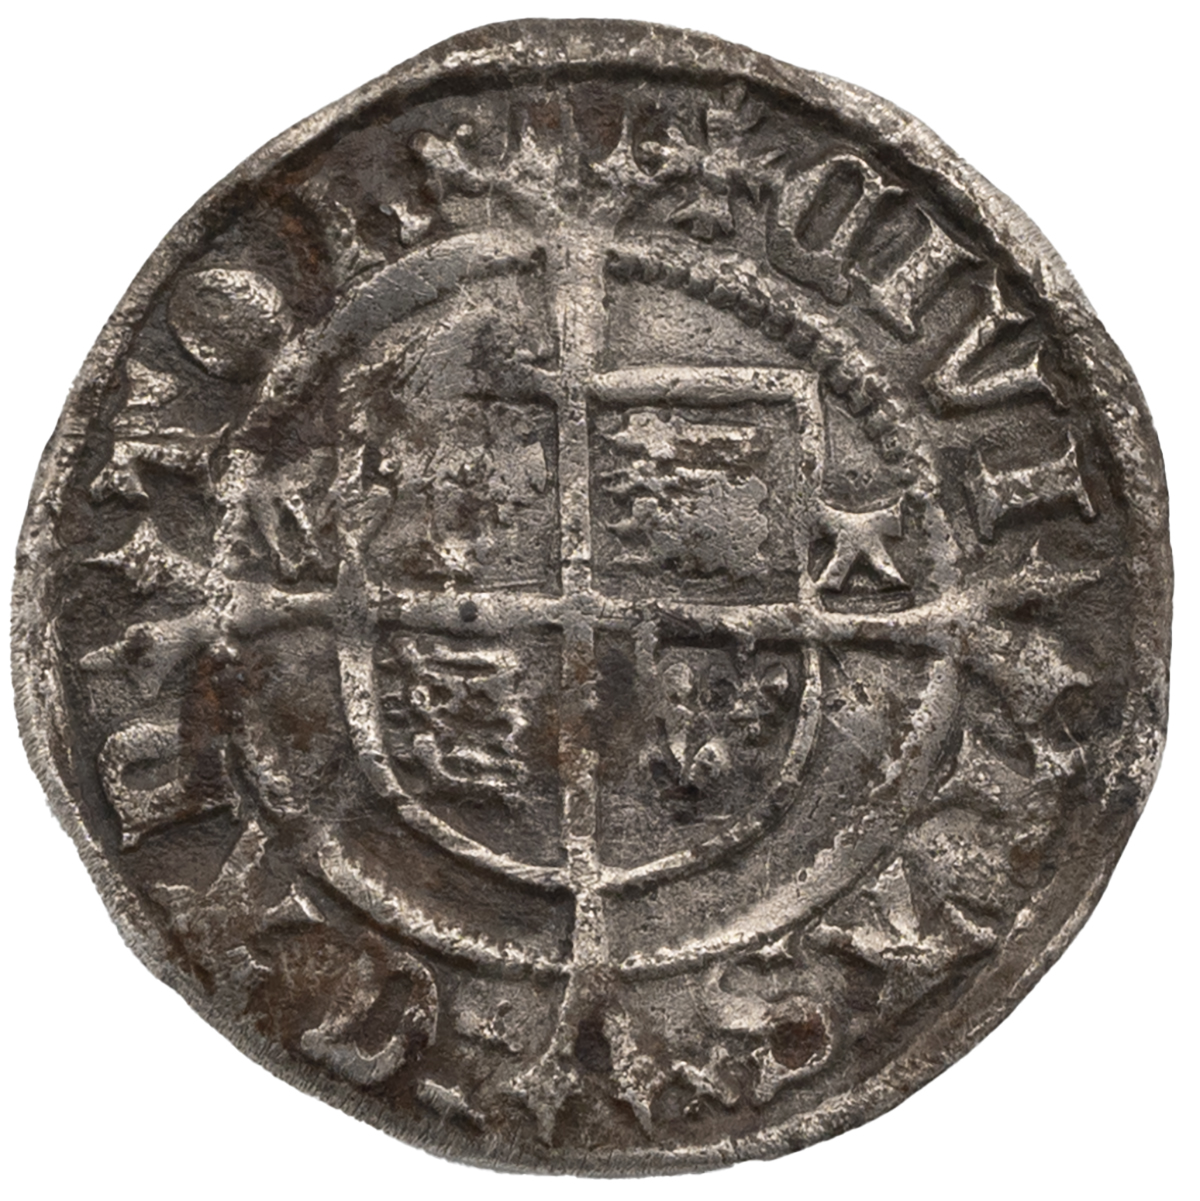 1526-1532 Henry VIII silver Halfgroat Canterbury mint coin with cross patonce mintmark (S 2543). ... - Image 2 of 2